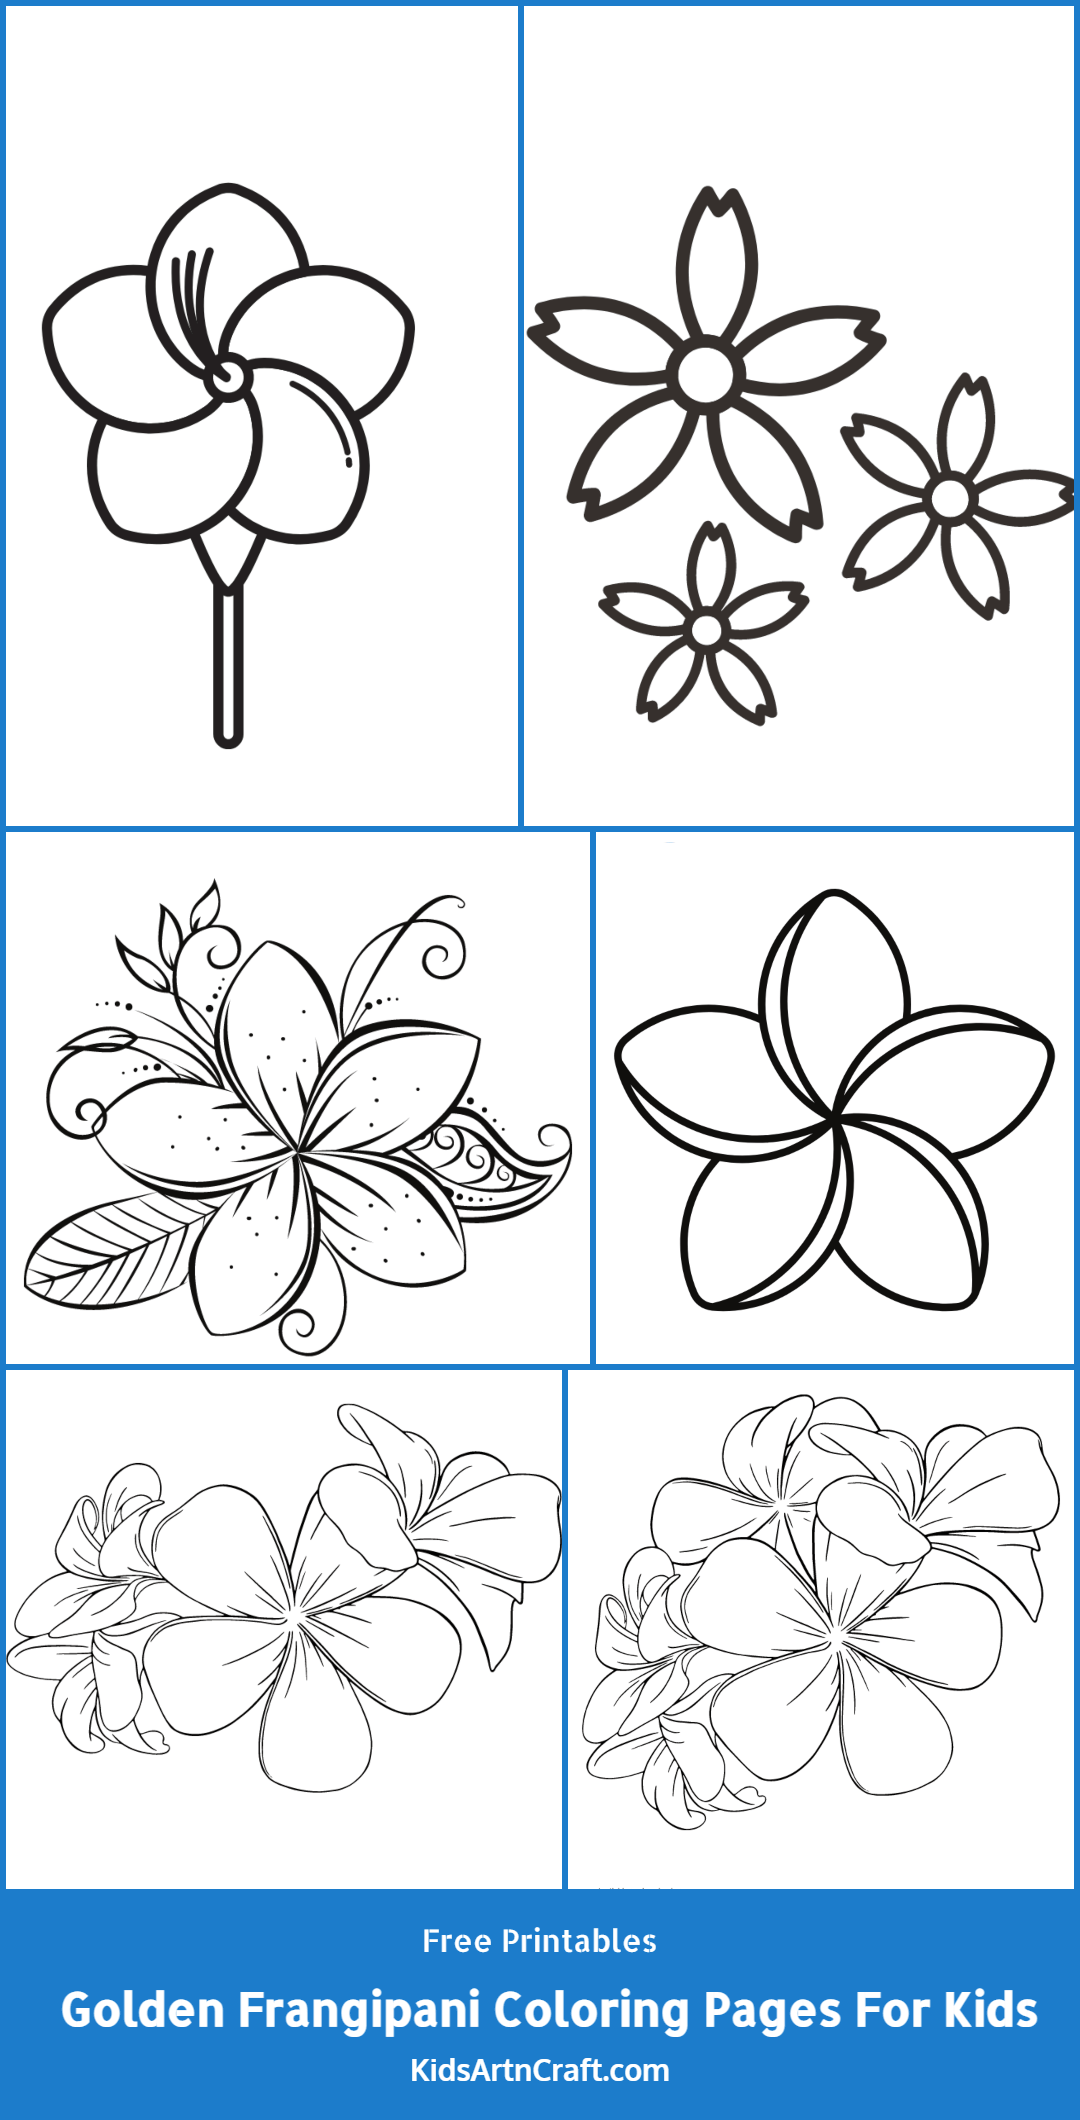 Golden Frangipani Coloring Pages For Kids – Free Printables